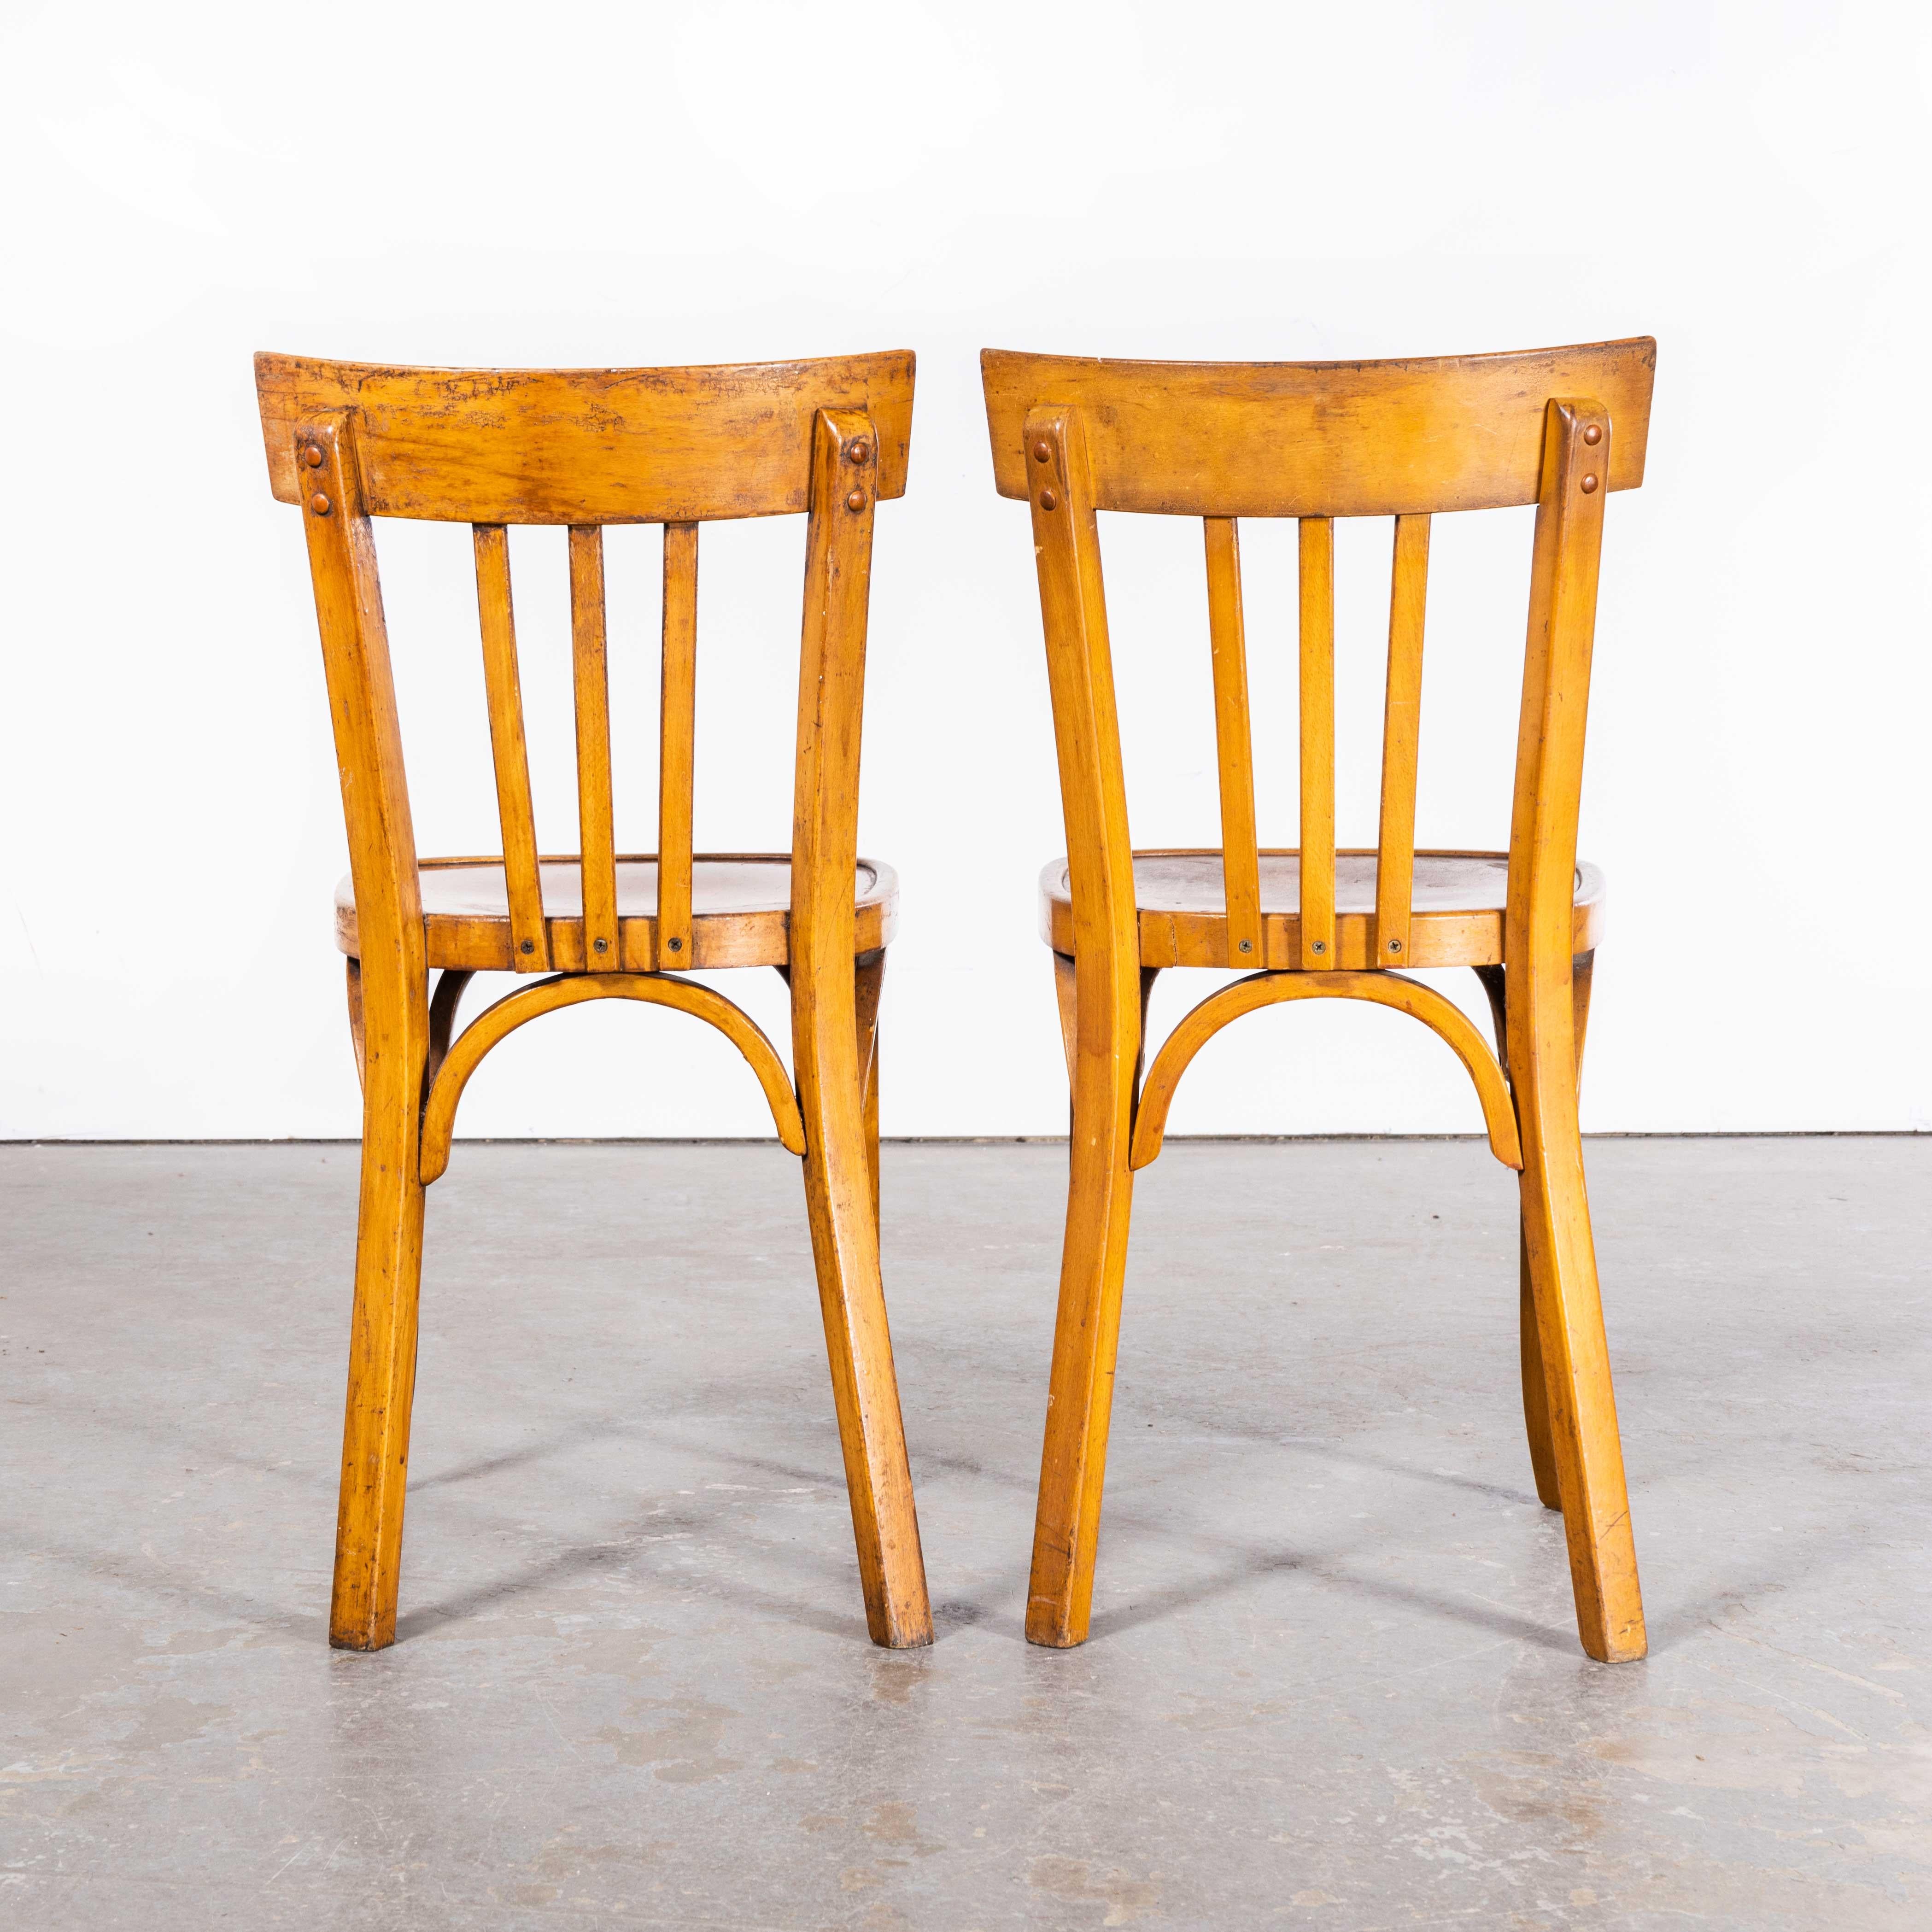 1950s Luterma Warm Oak Bentwood Dining Chair – Pair
1950s Luterma Warm Oak Bentwood Dining Chair – Pair. The process of steam bending beech to create elegant chairs was discovered and developed by Thonet, but when its patents expired in 1869 many